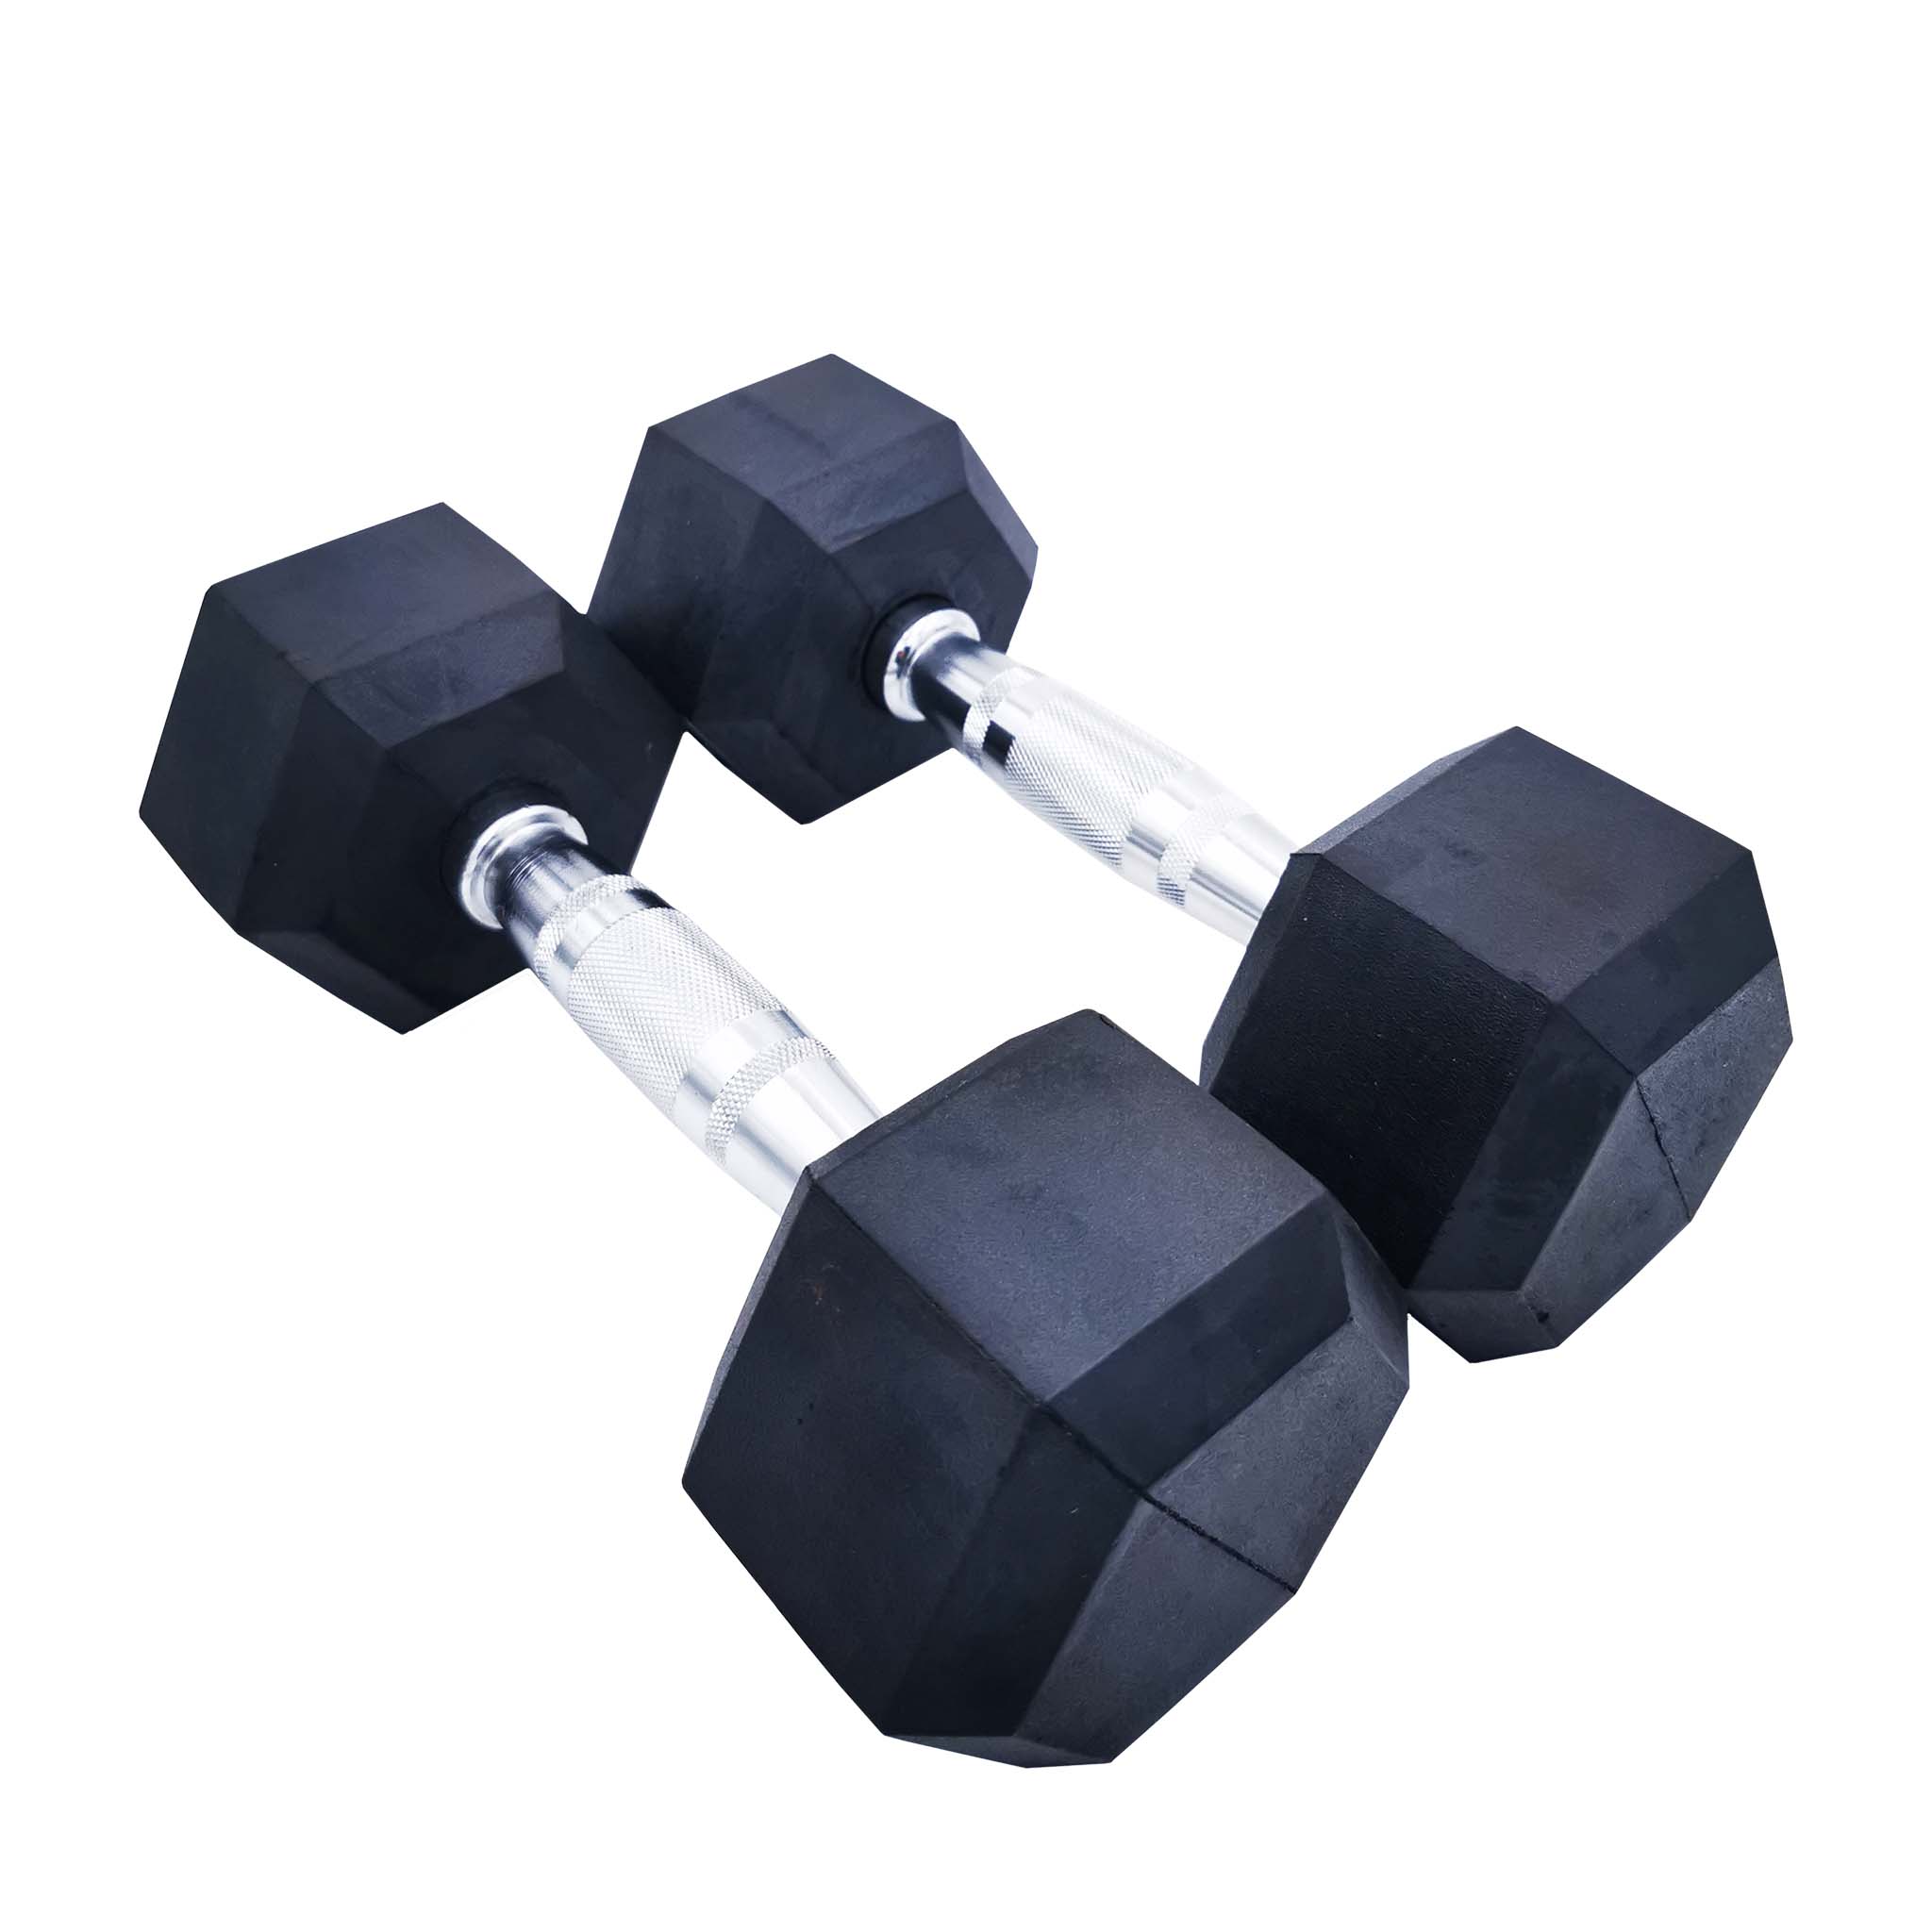 5kg to 20kg Rubber Hex Dumbbell Package (7 pairs) | INSOURCE